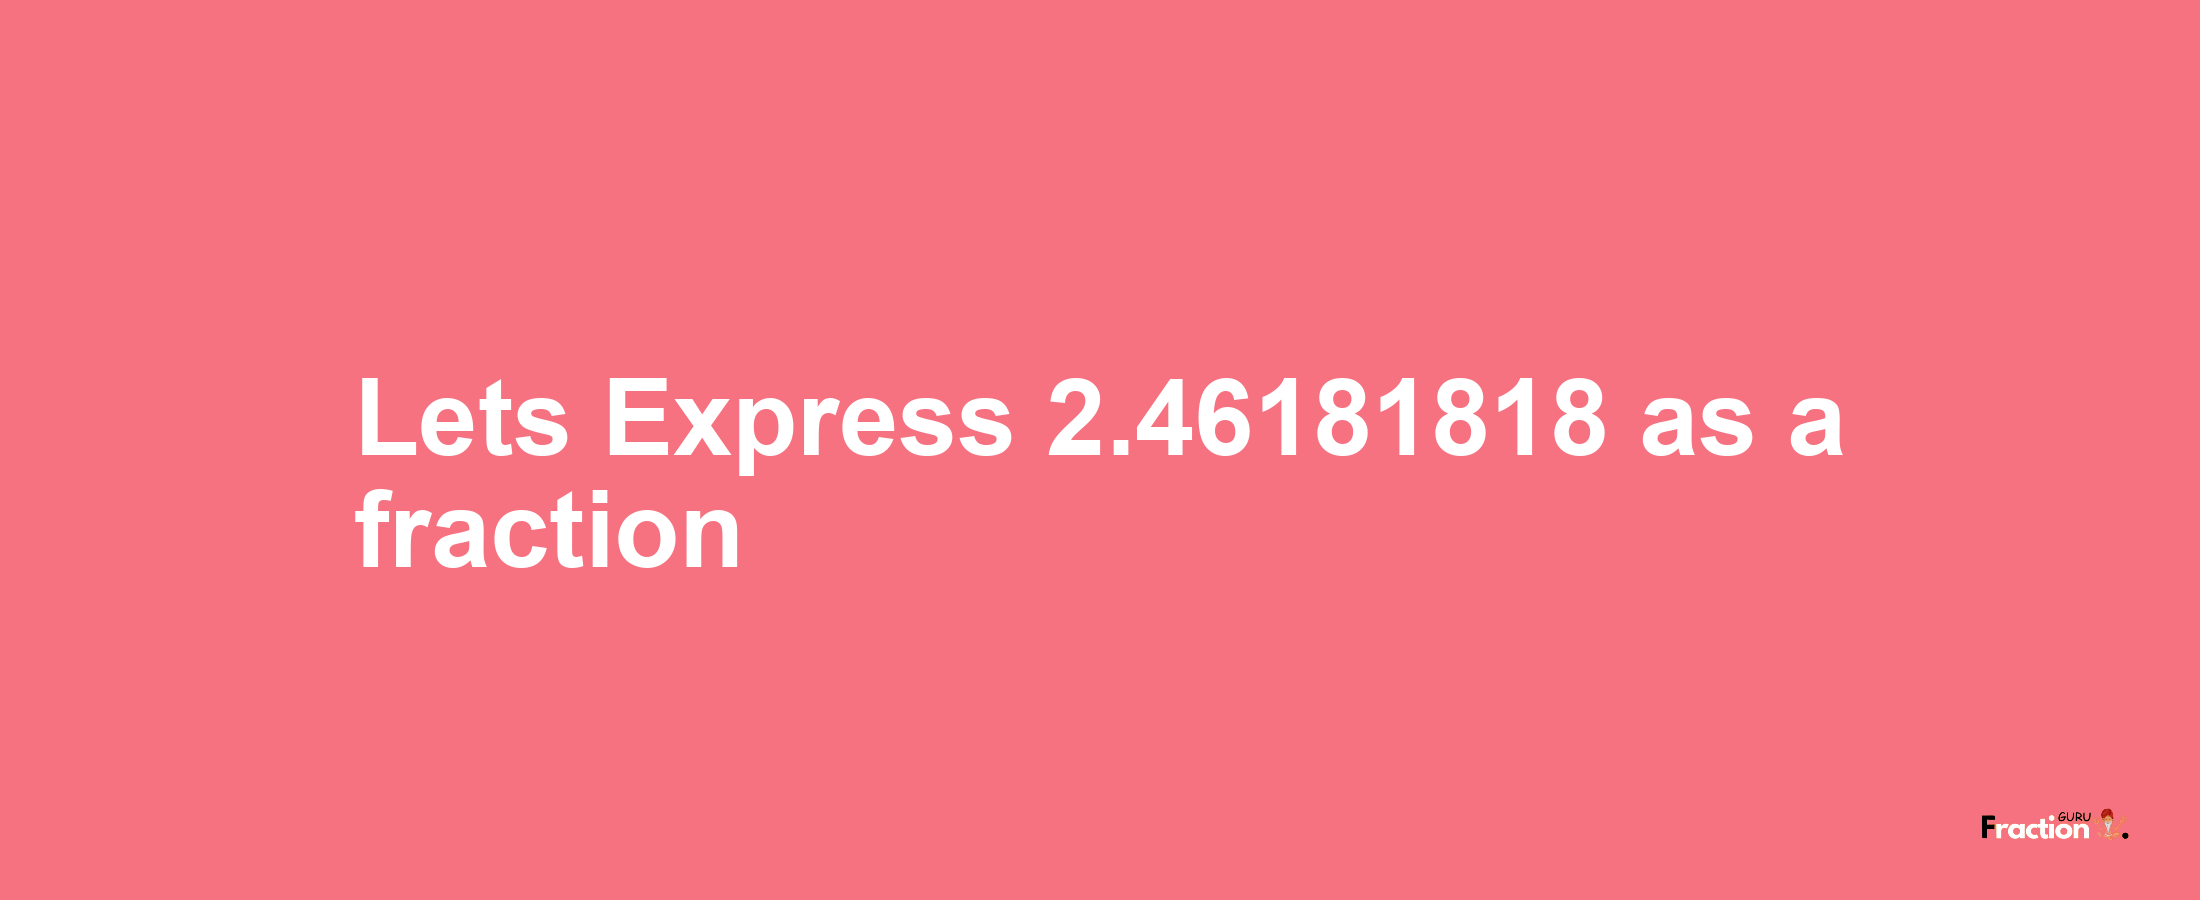 Lets Express 2.46181818 as afraction